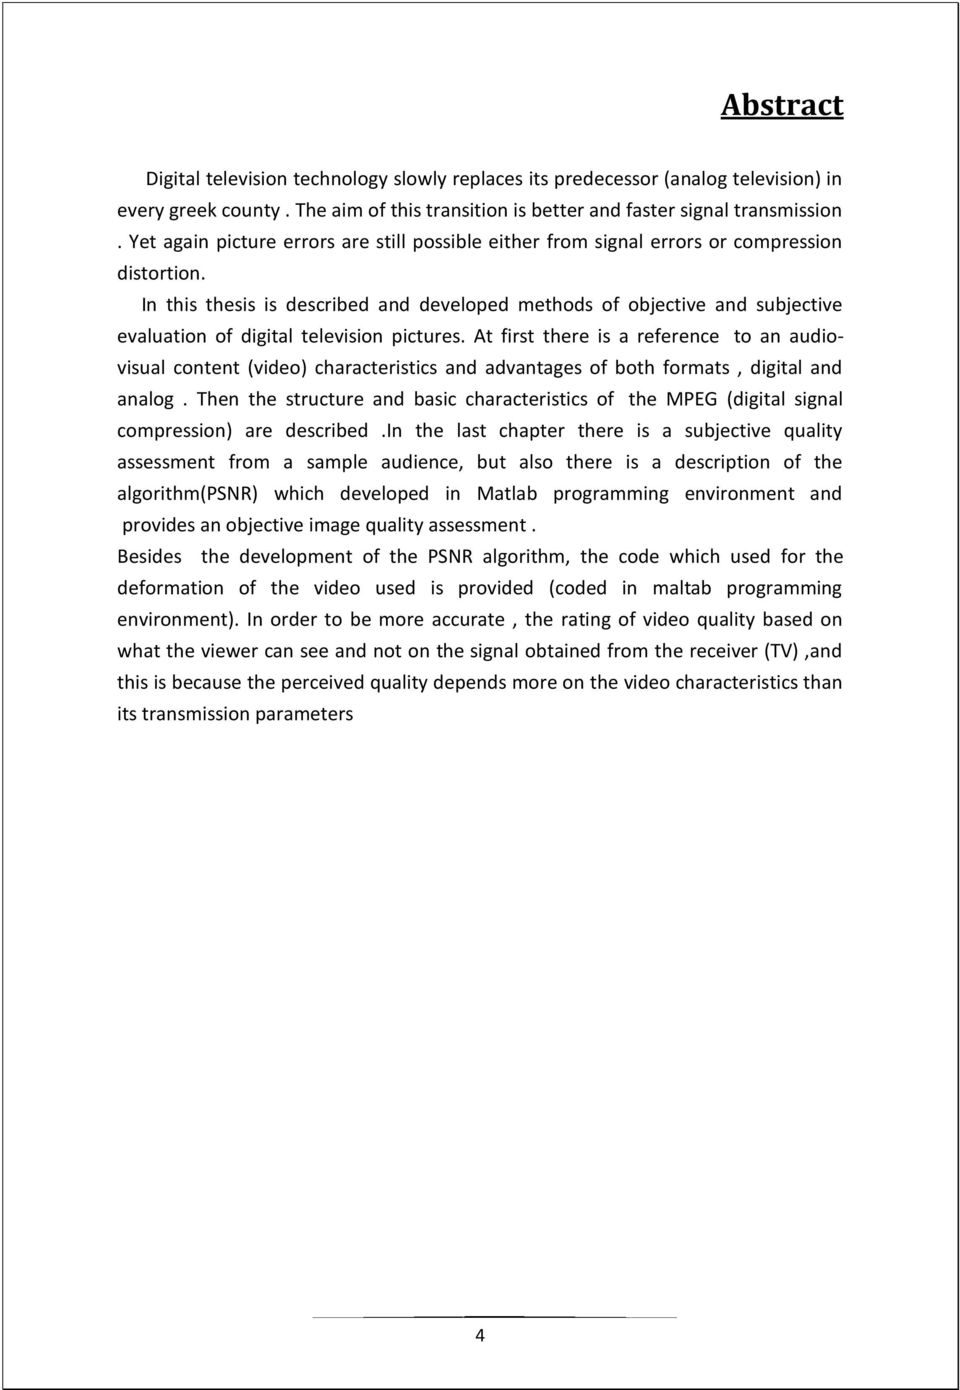 In this thesis is described and developed methods of objective and subjective evaluation of digital television pictures.